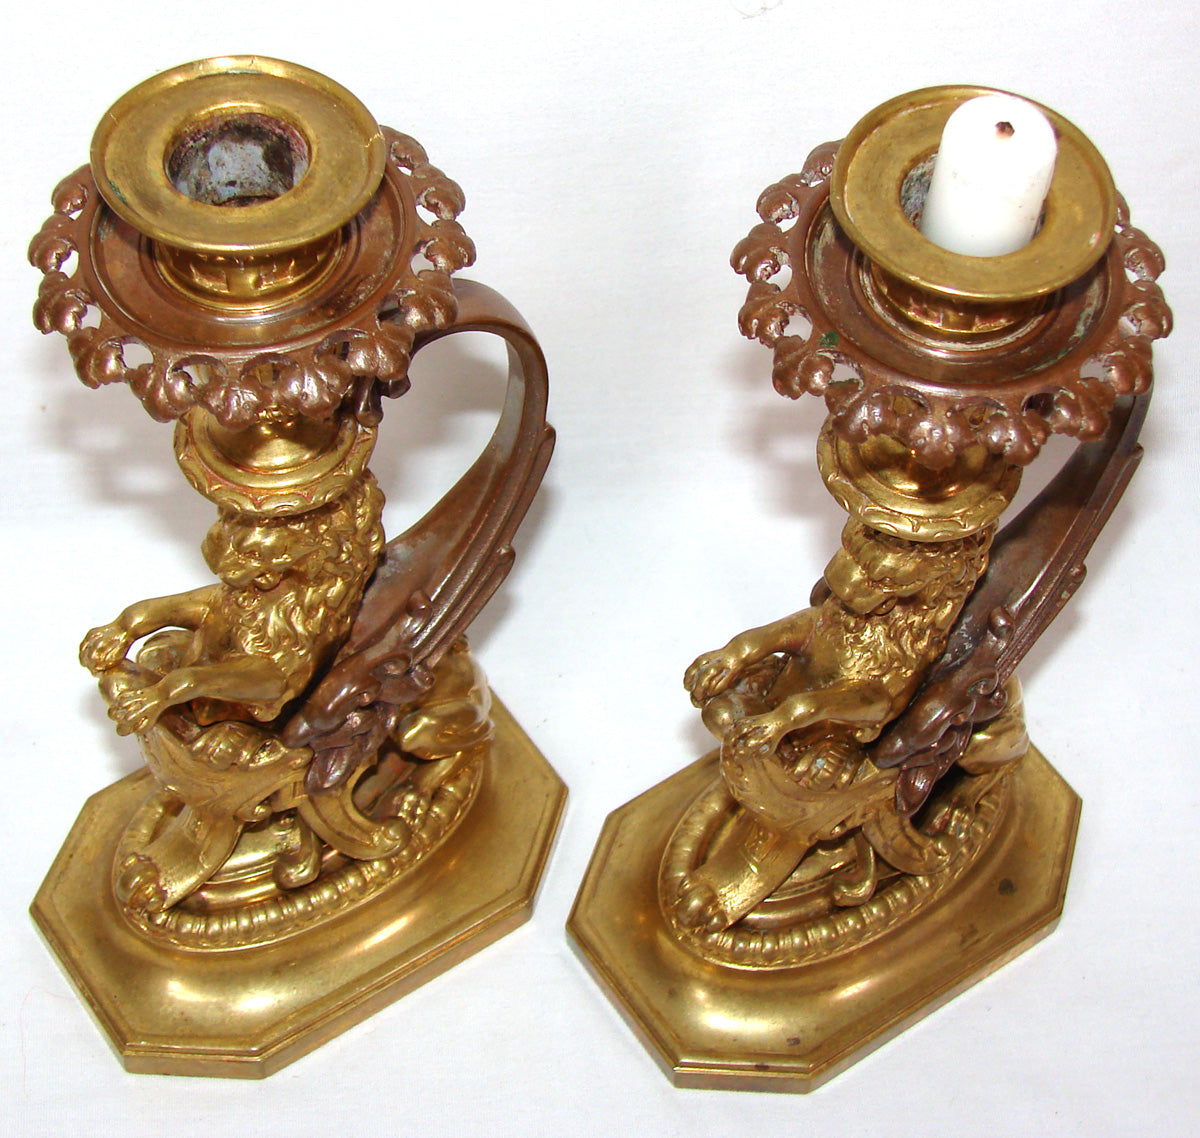 Antique French Victorian Era 9" Heavy Brass or Gilt Bronze Candlestick or Candle Holder Pair, Lions